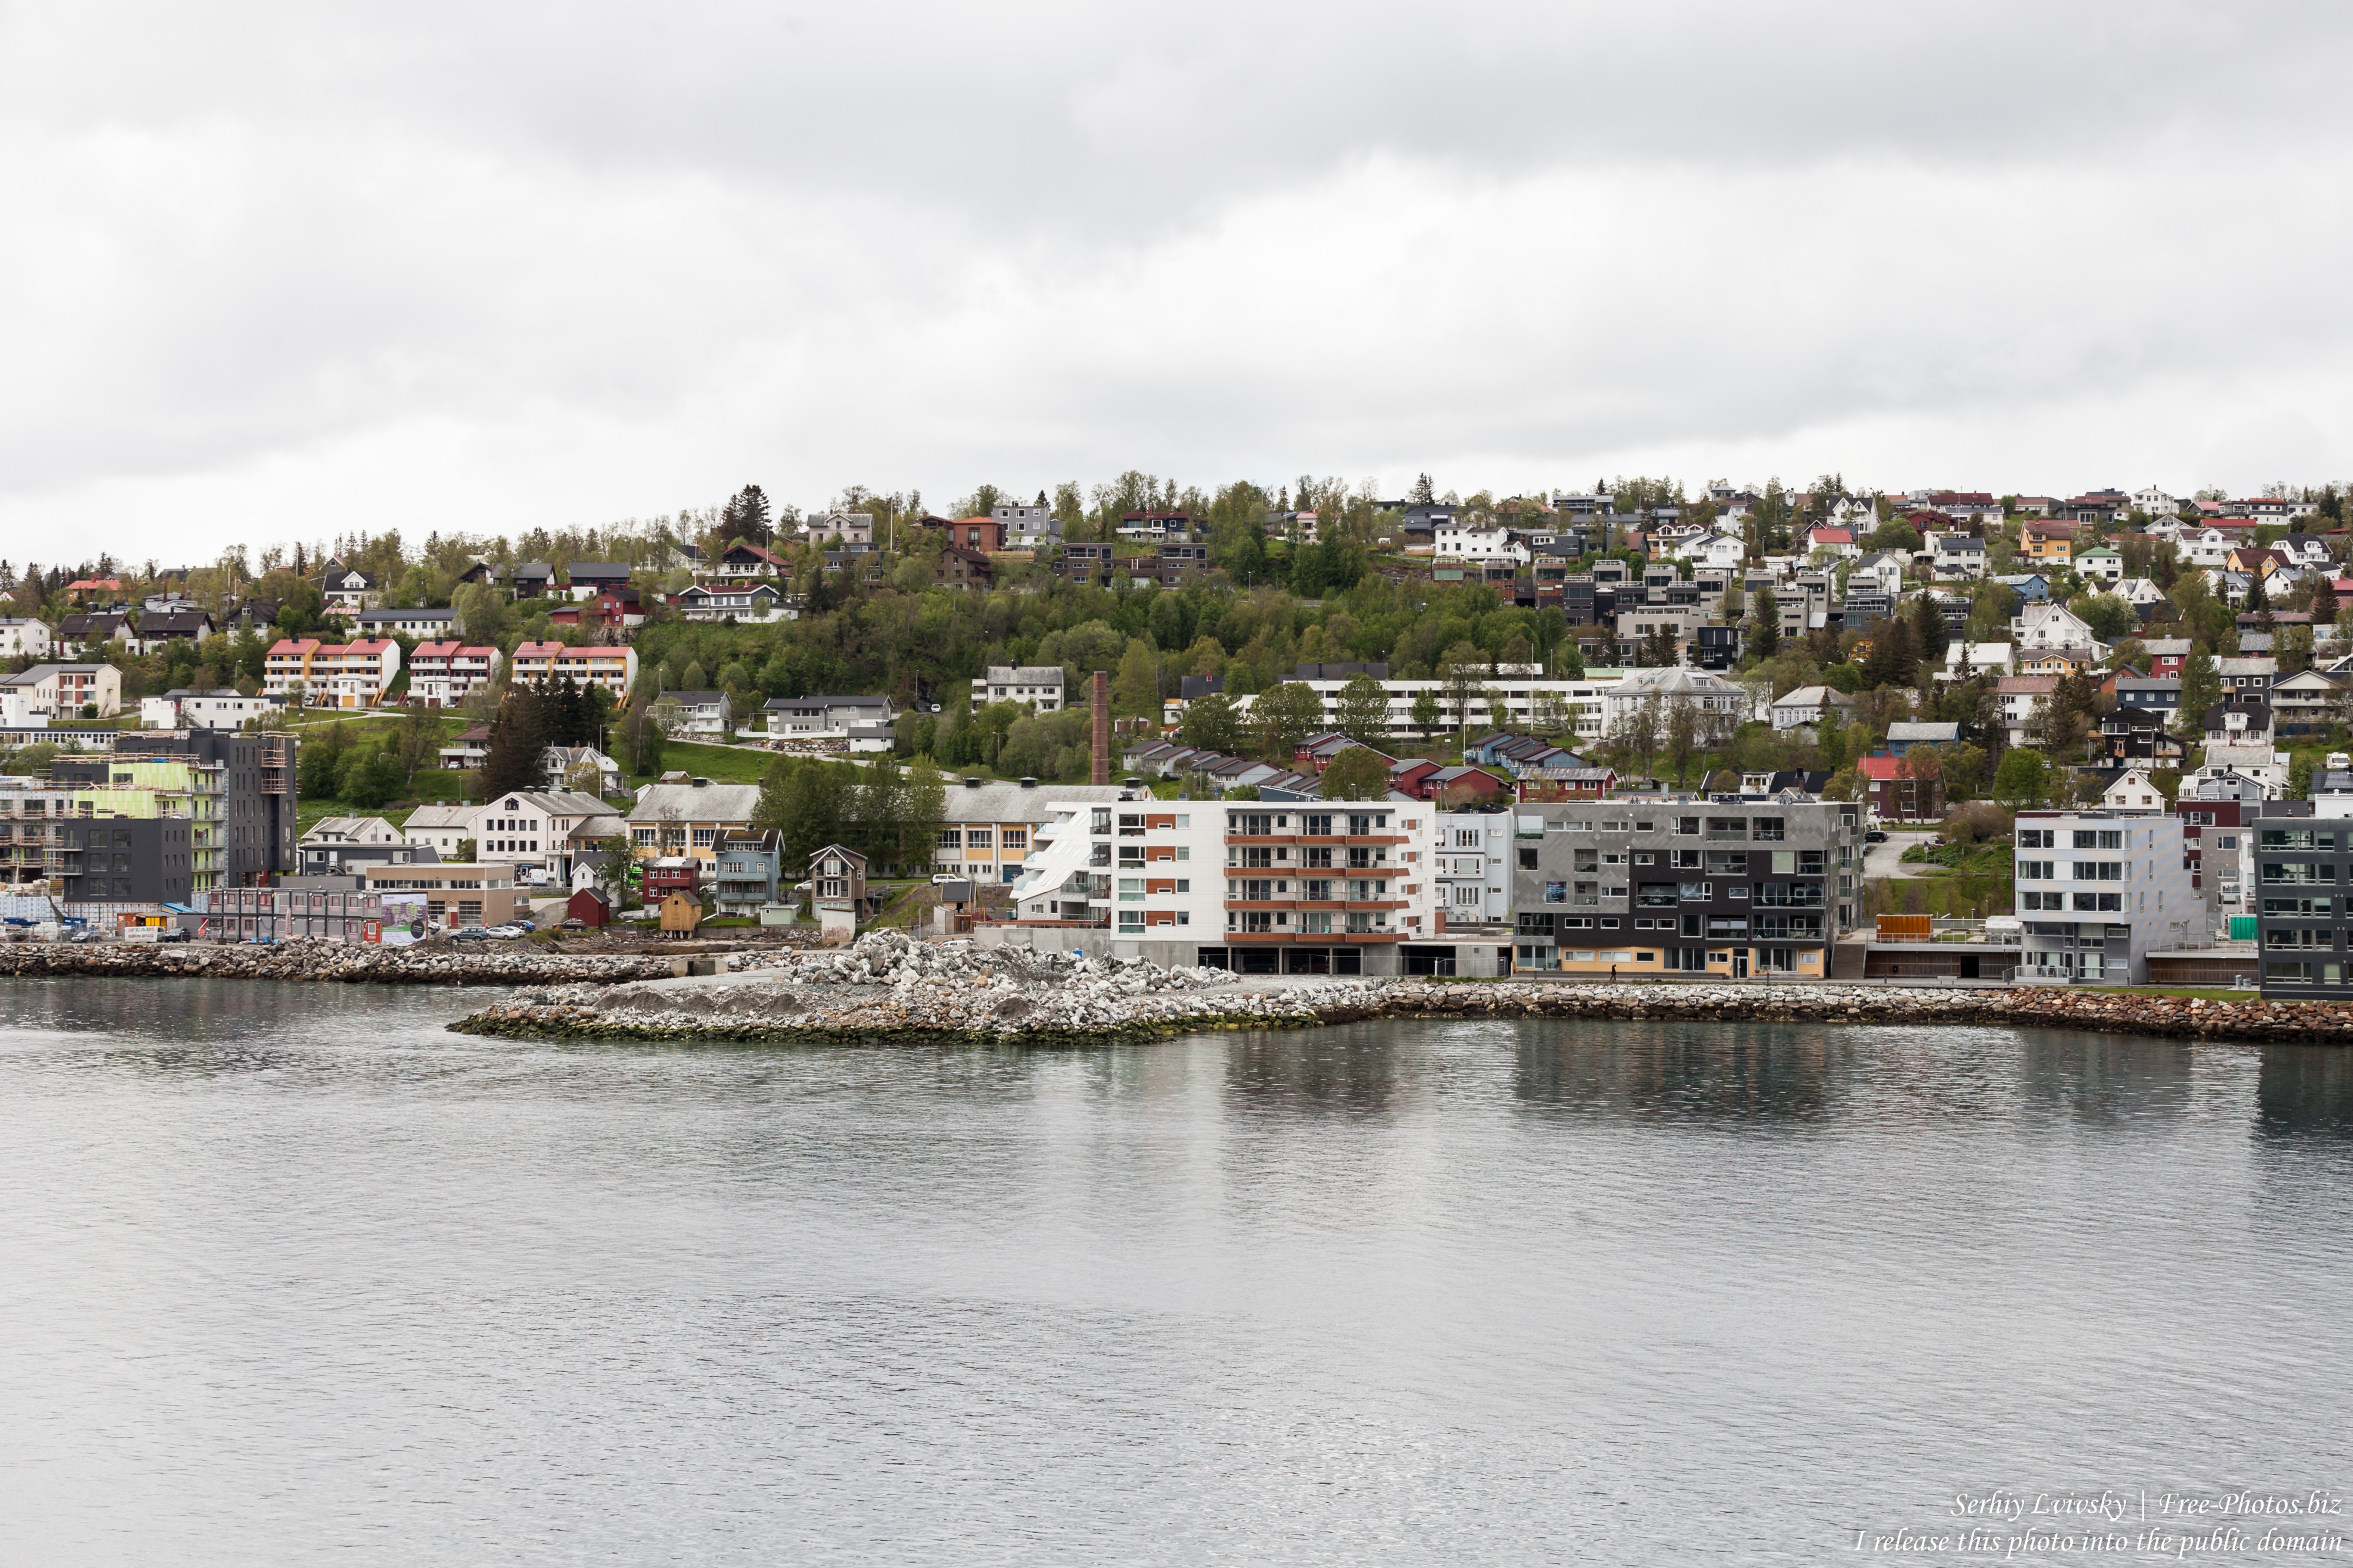 Tromso, Norway, photographed in June 2018 by Serhiy Lvivsky, picture 28